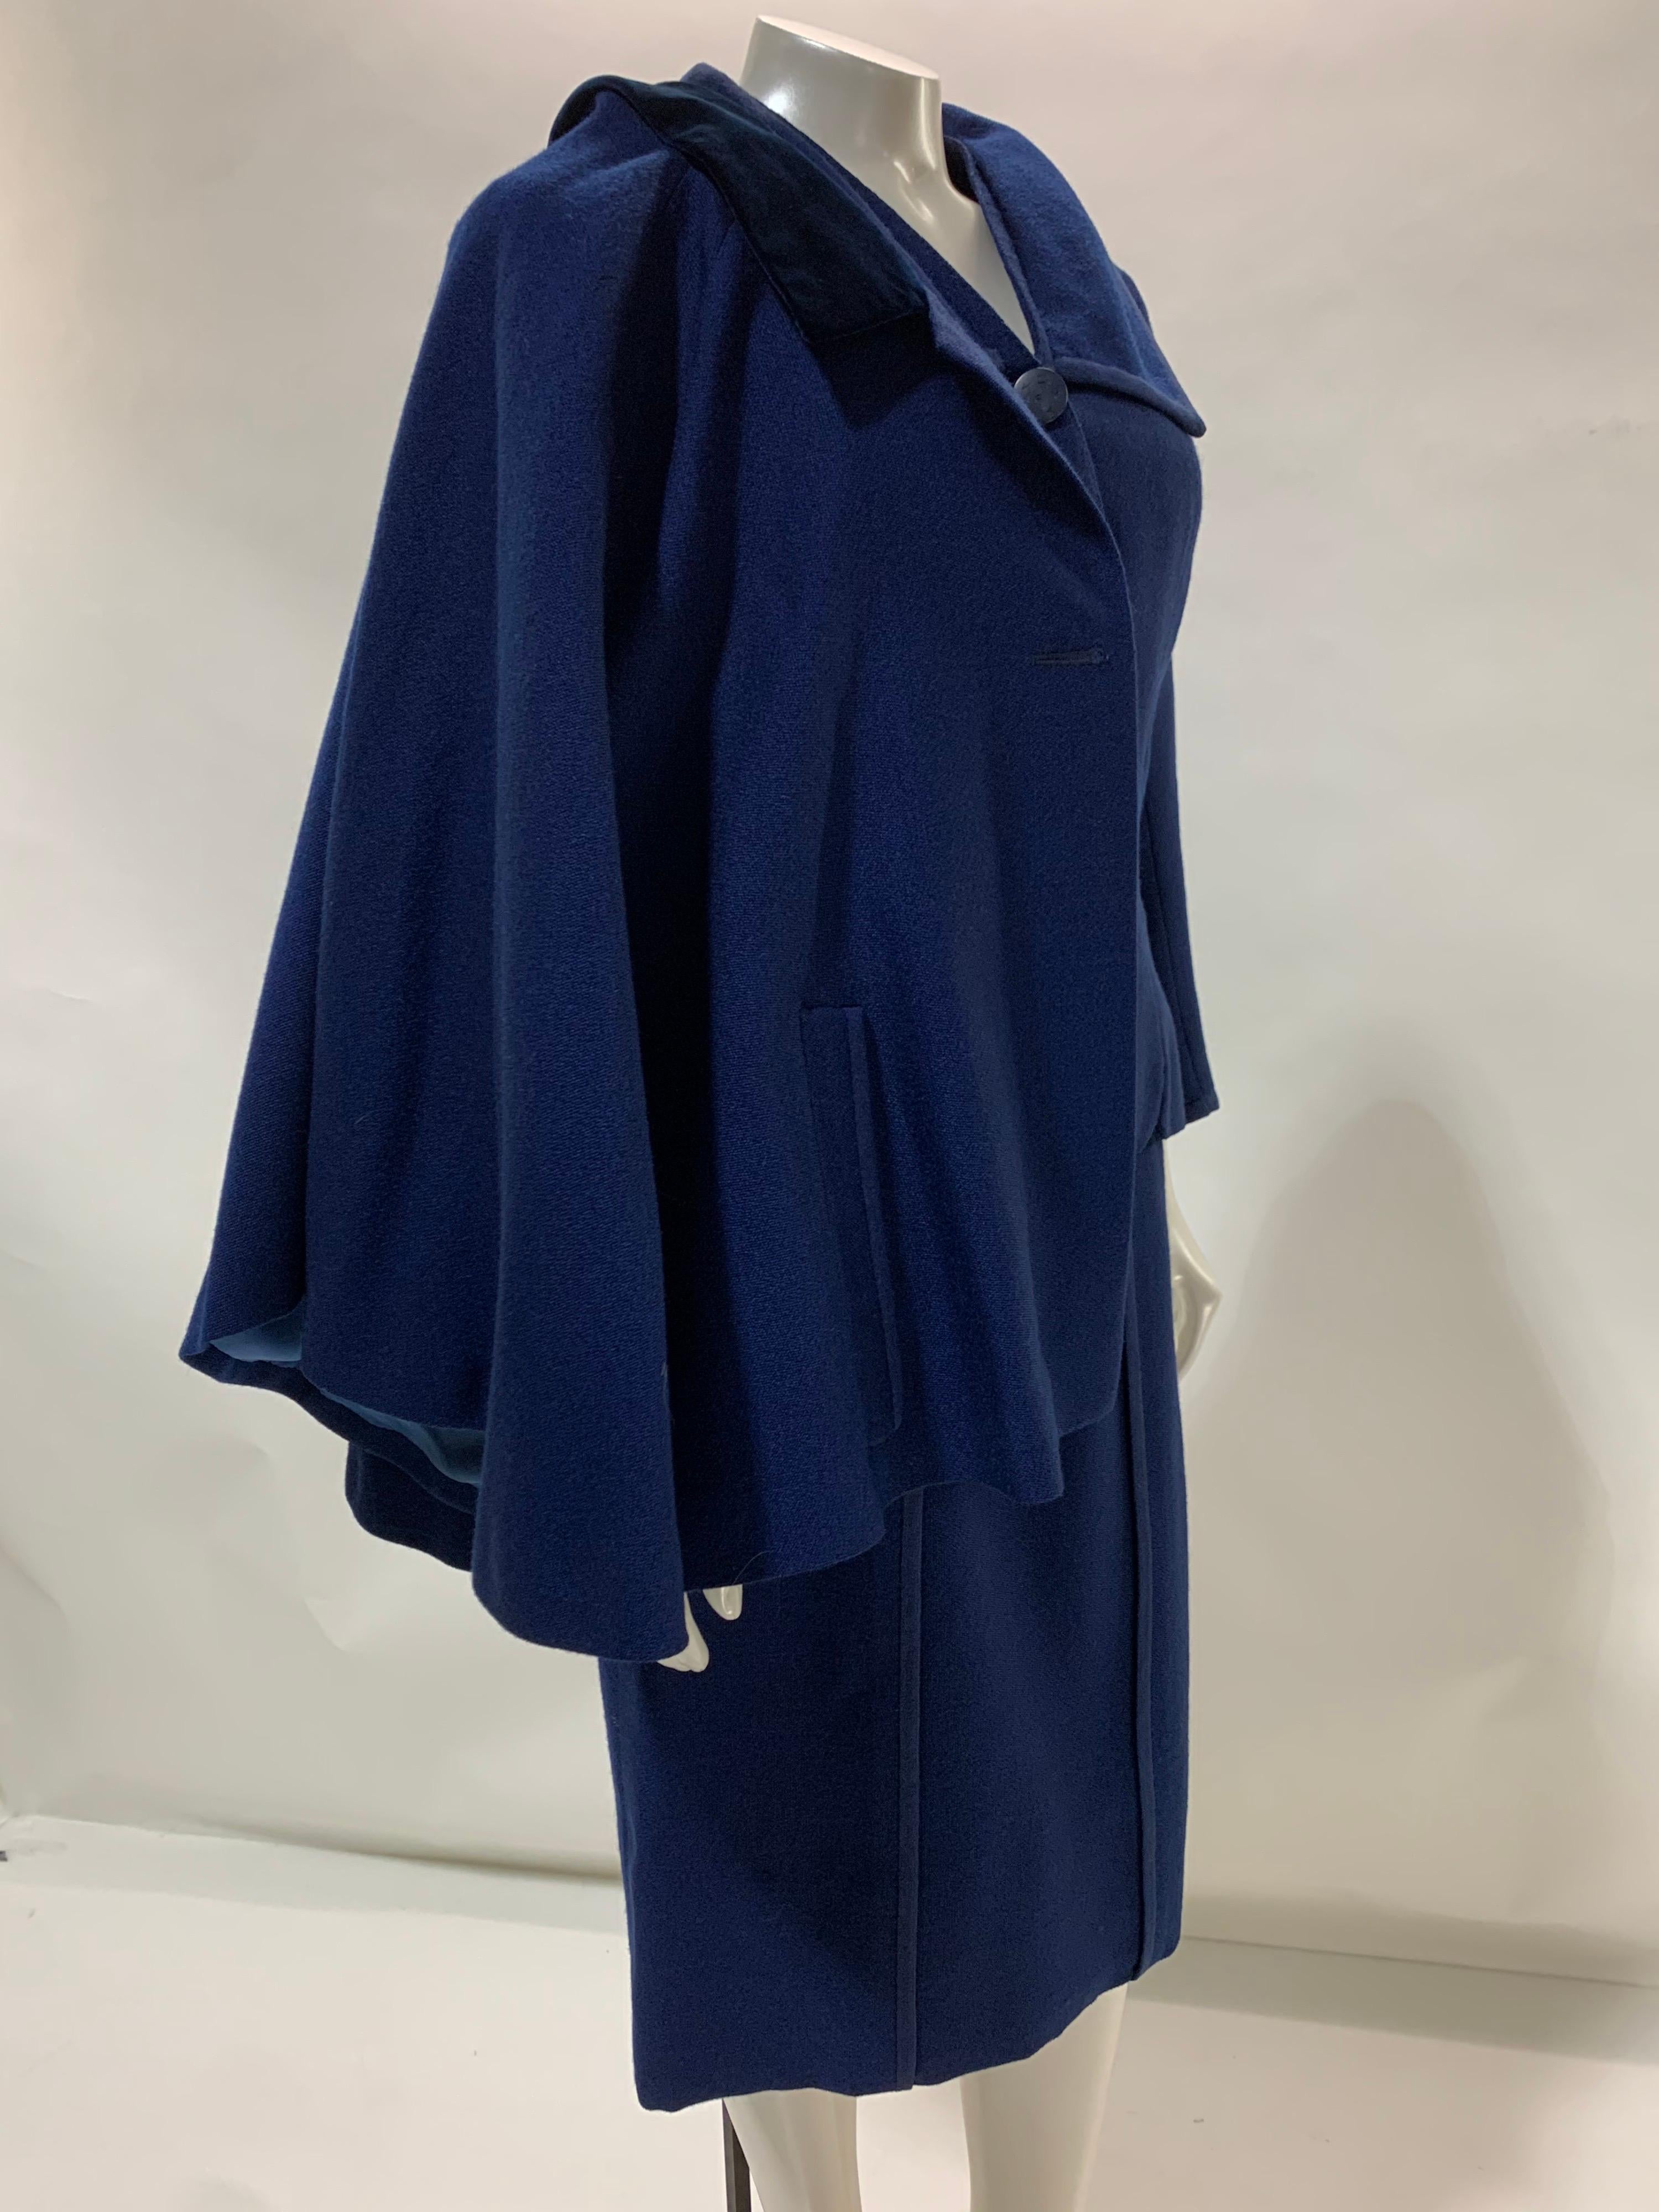 1940s Creed of London Finely Tailored Couture Royal Blue Skirt Suit w/ Caplet  In Excellent Condition For Sale In Gresham, OR